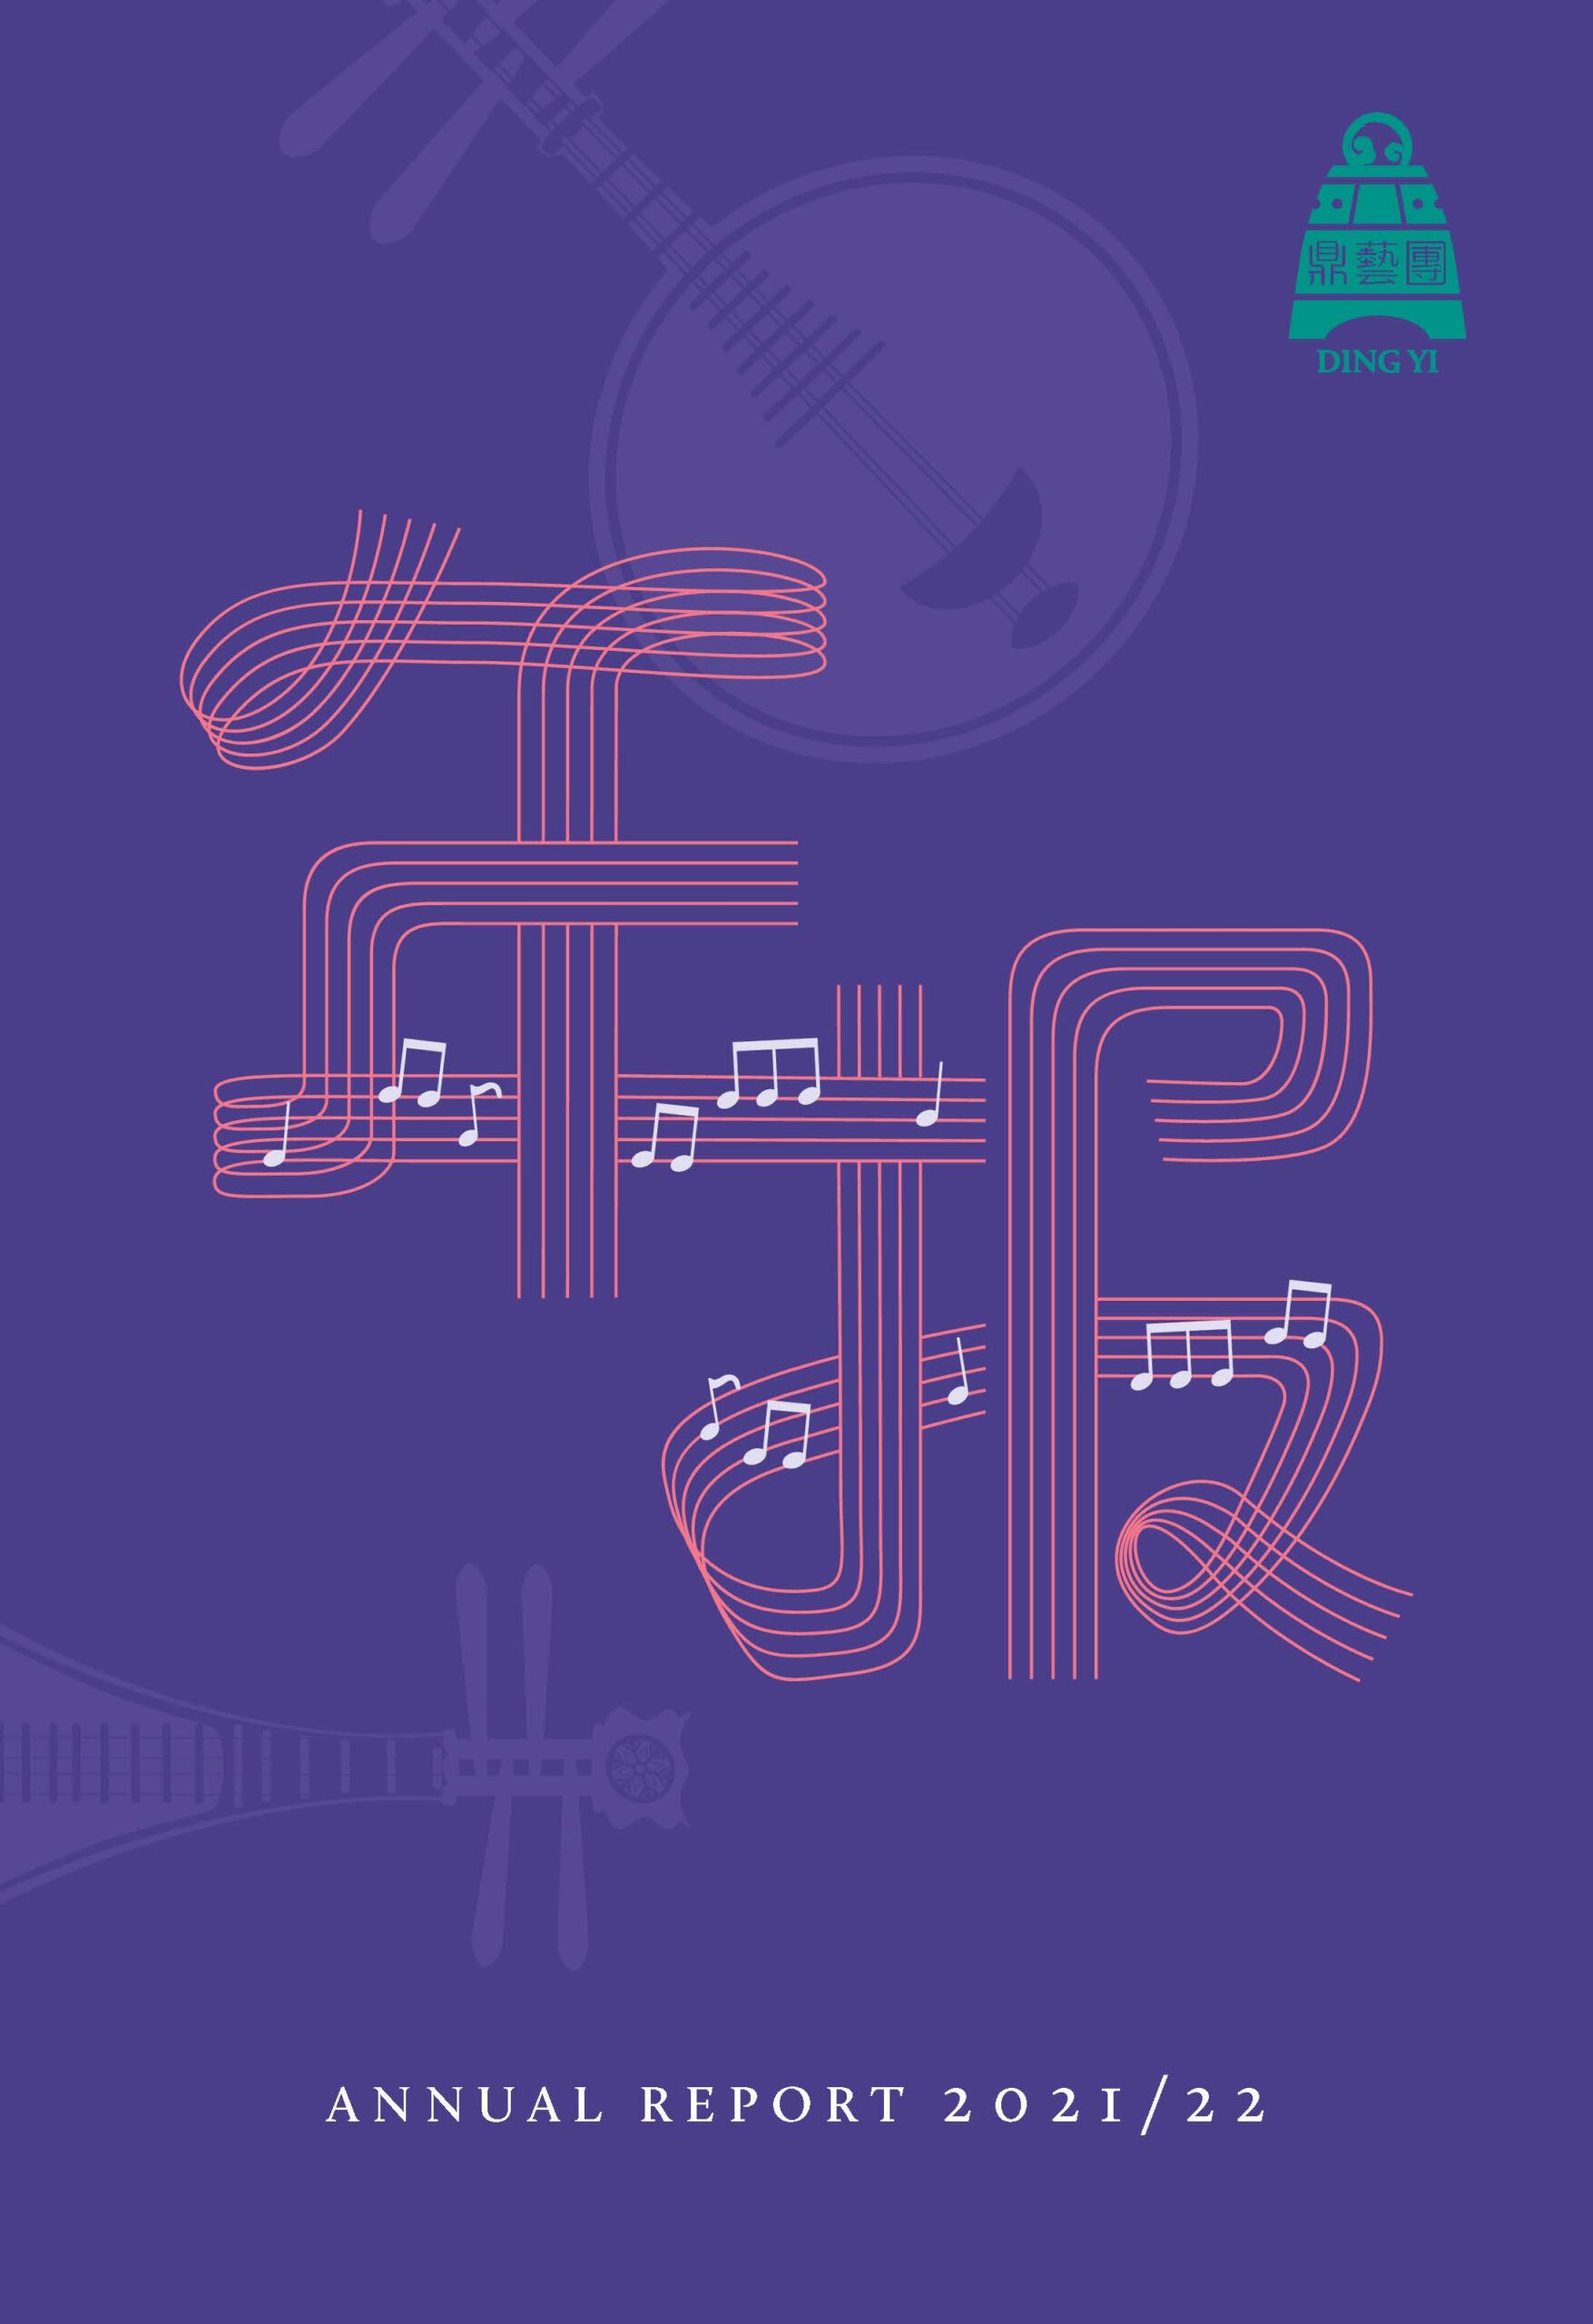 Ding Yi Music Company Annual Report 2021-22